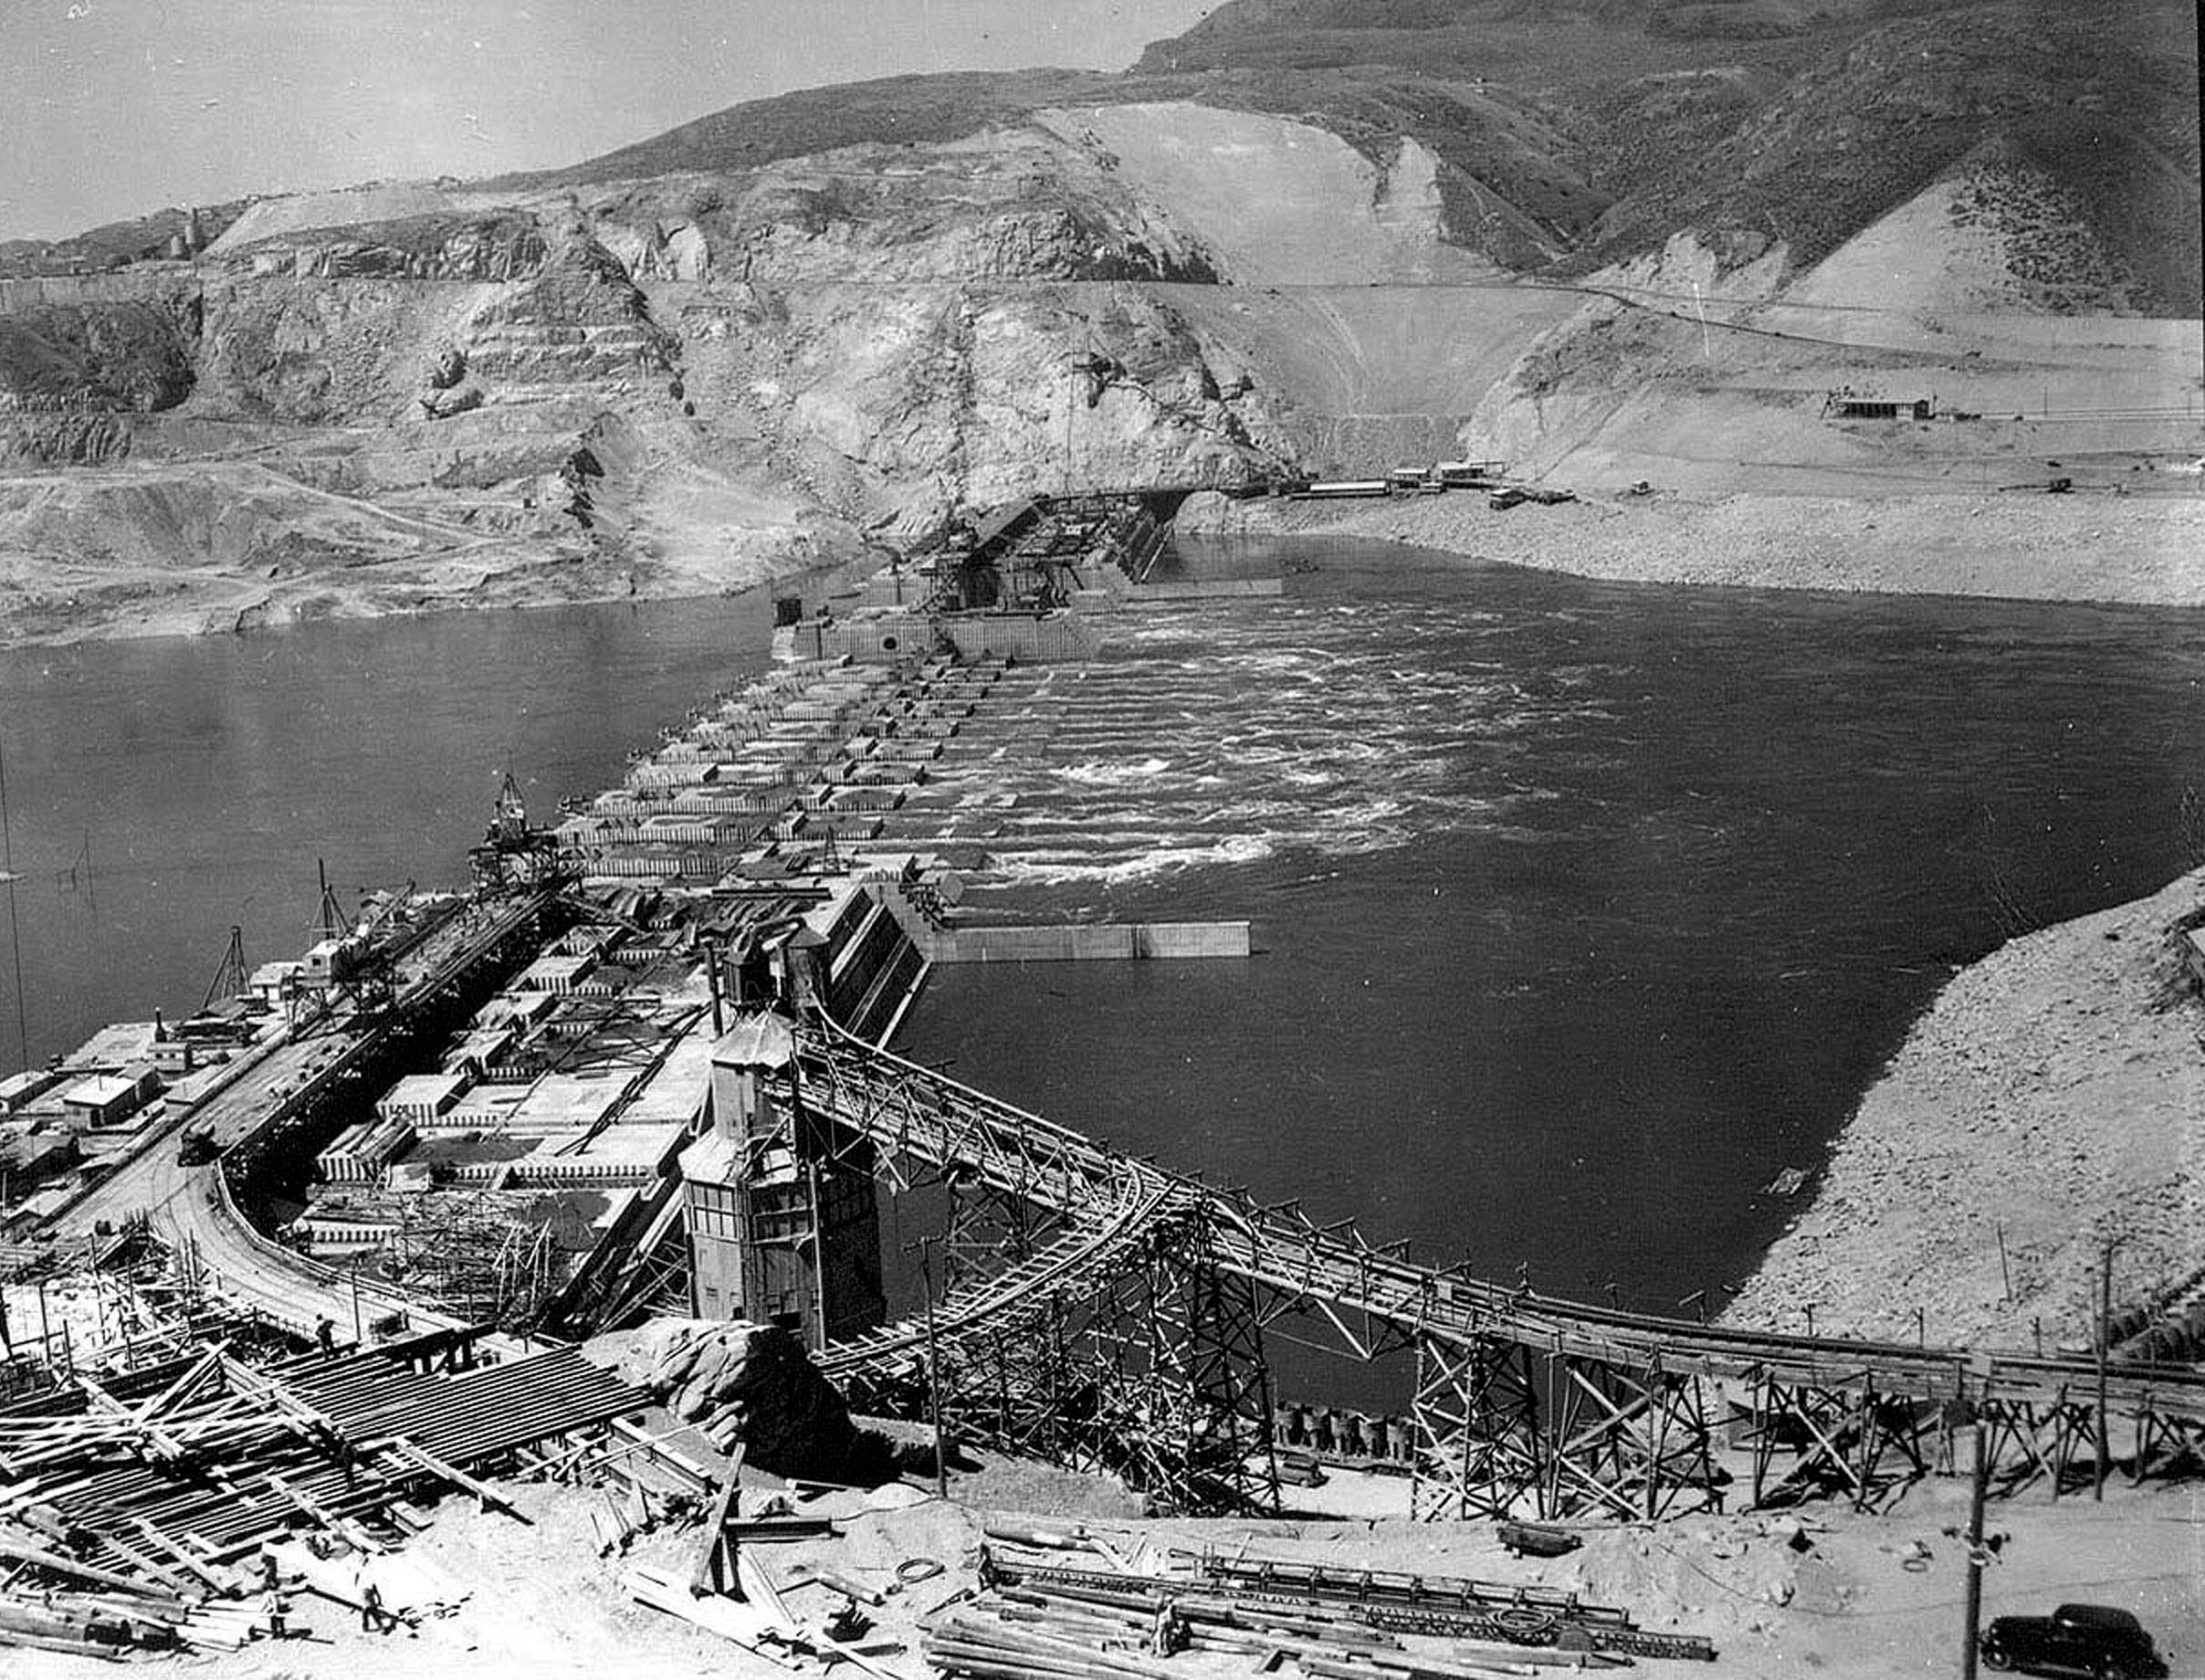 Circa 1936. East mix plant in foreground and overall view of Grand Coulee Dam project.